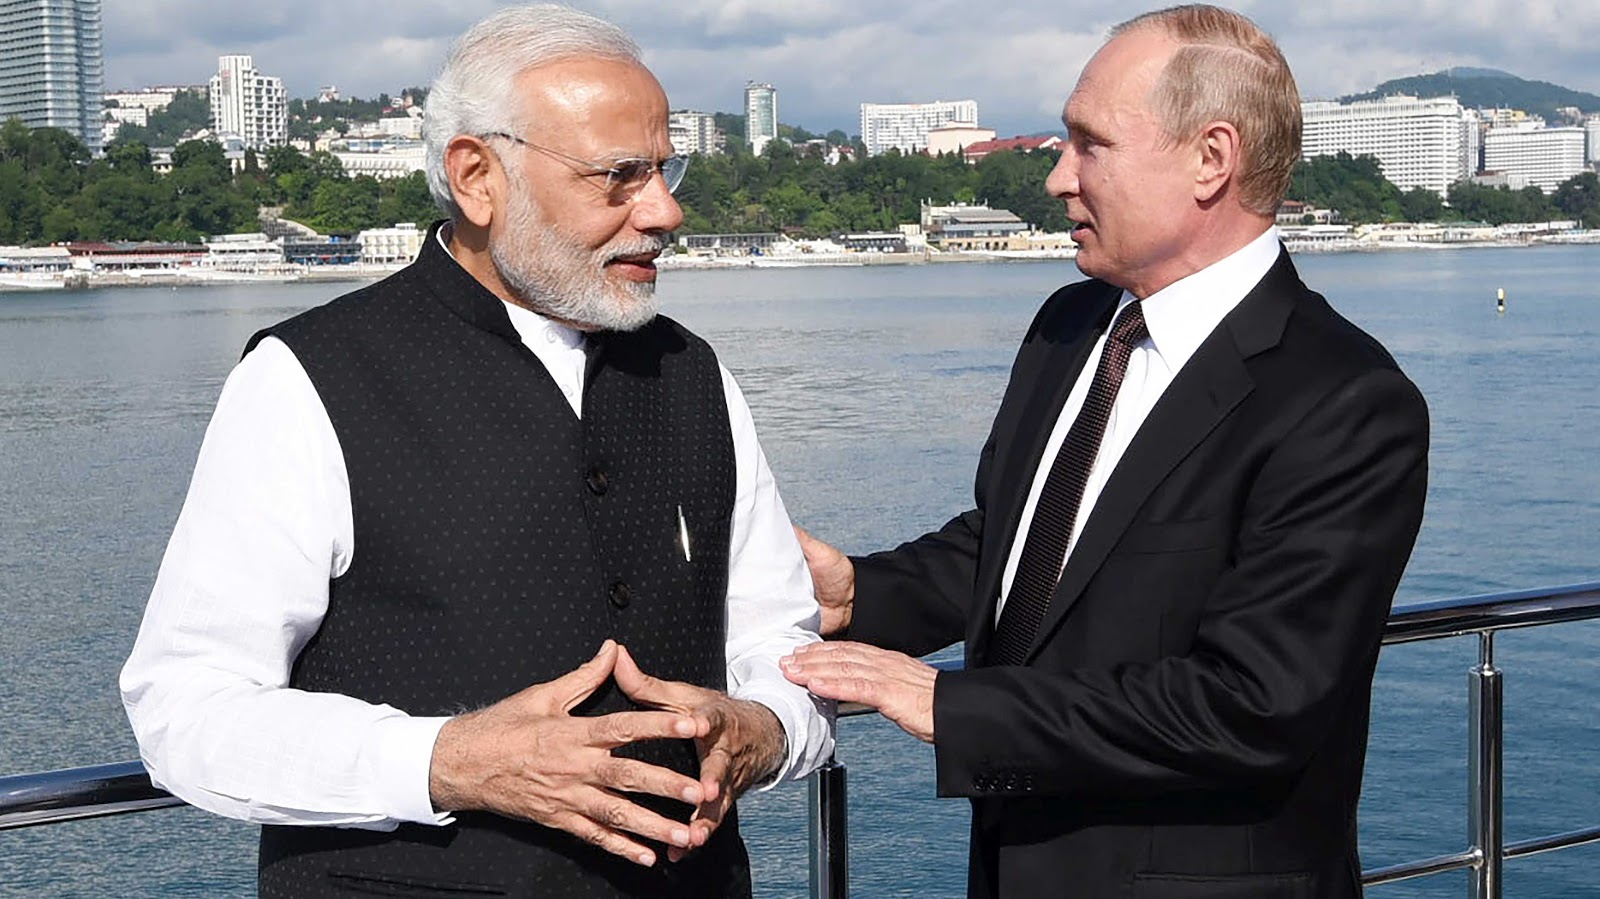 Video Of Putin Playing With His Watch While In A Meeting With PM Modi Is Going Viral RVCJ Media